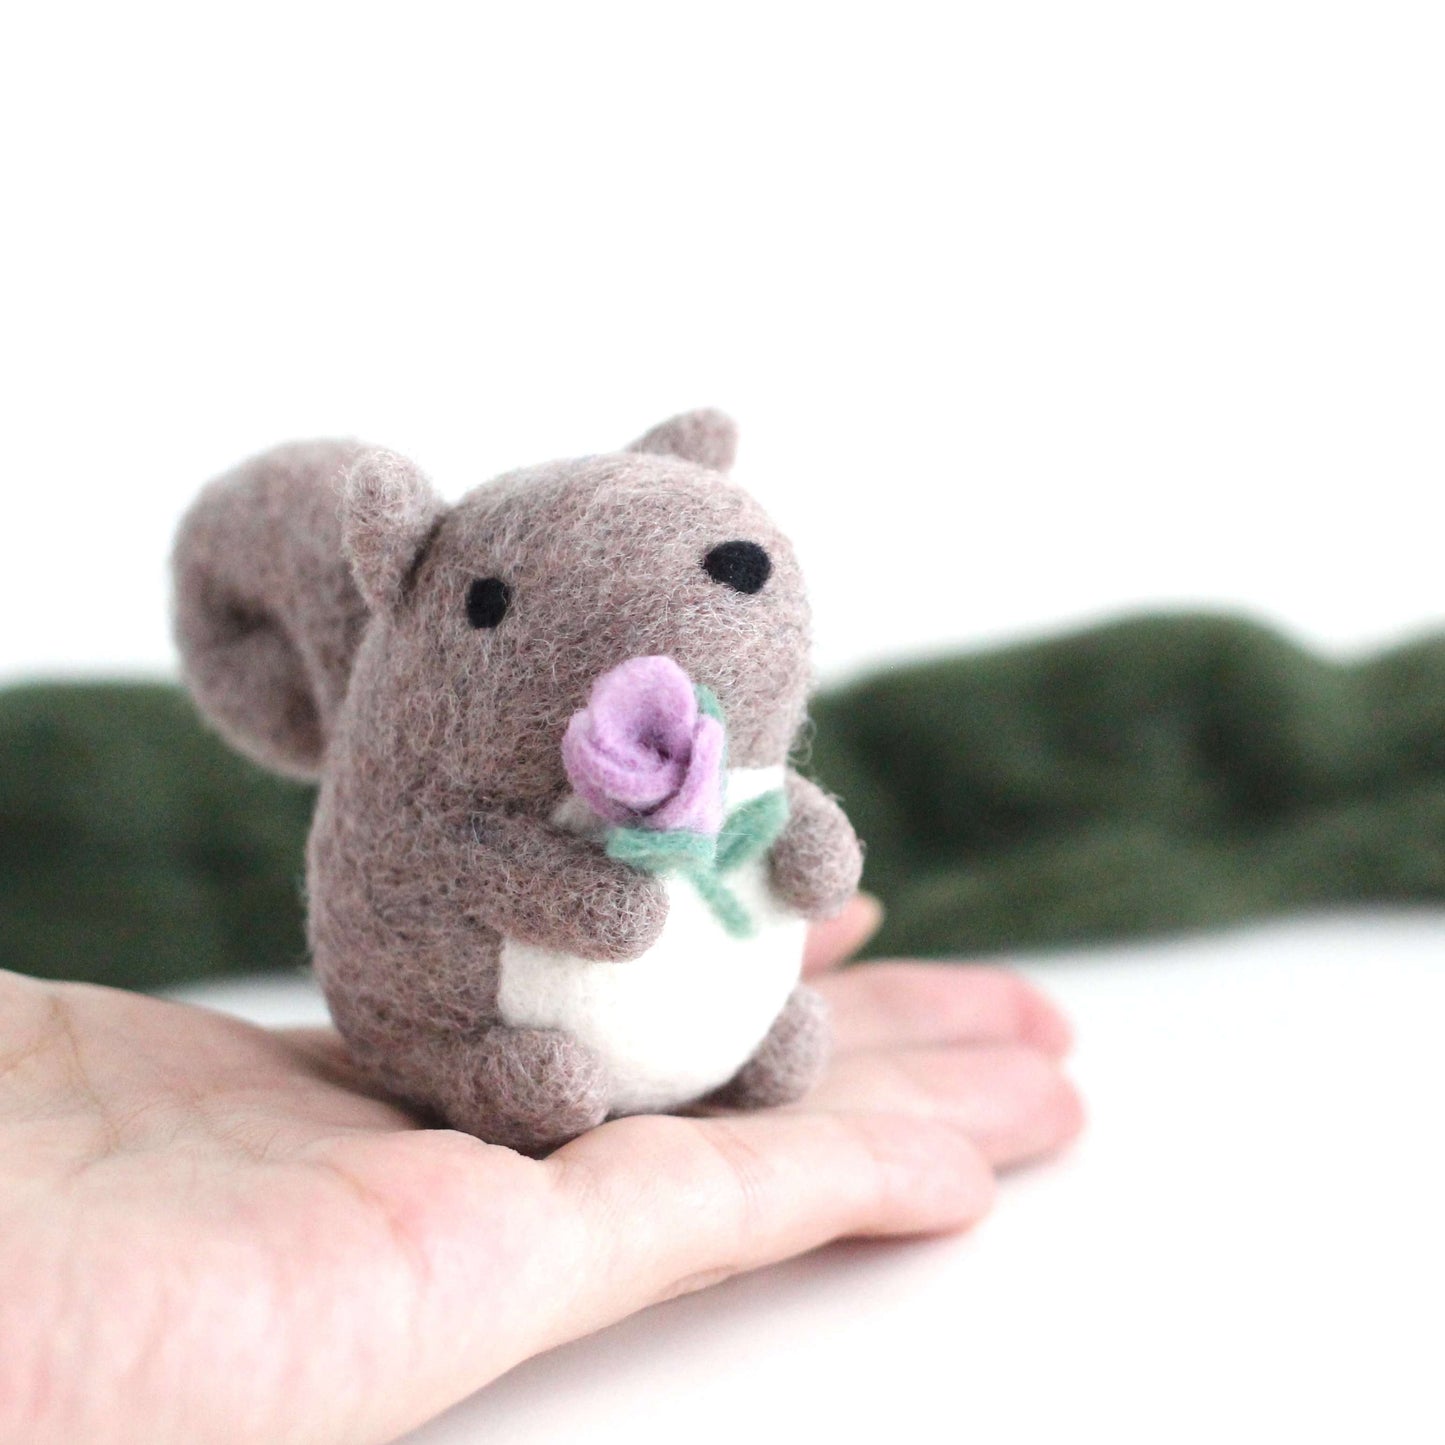 Needle Felted Grey Squirrel holding a Flower by Wild Whimsy Woolies